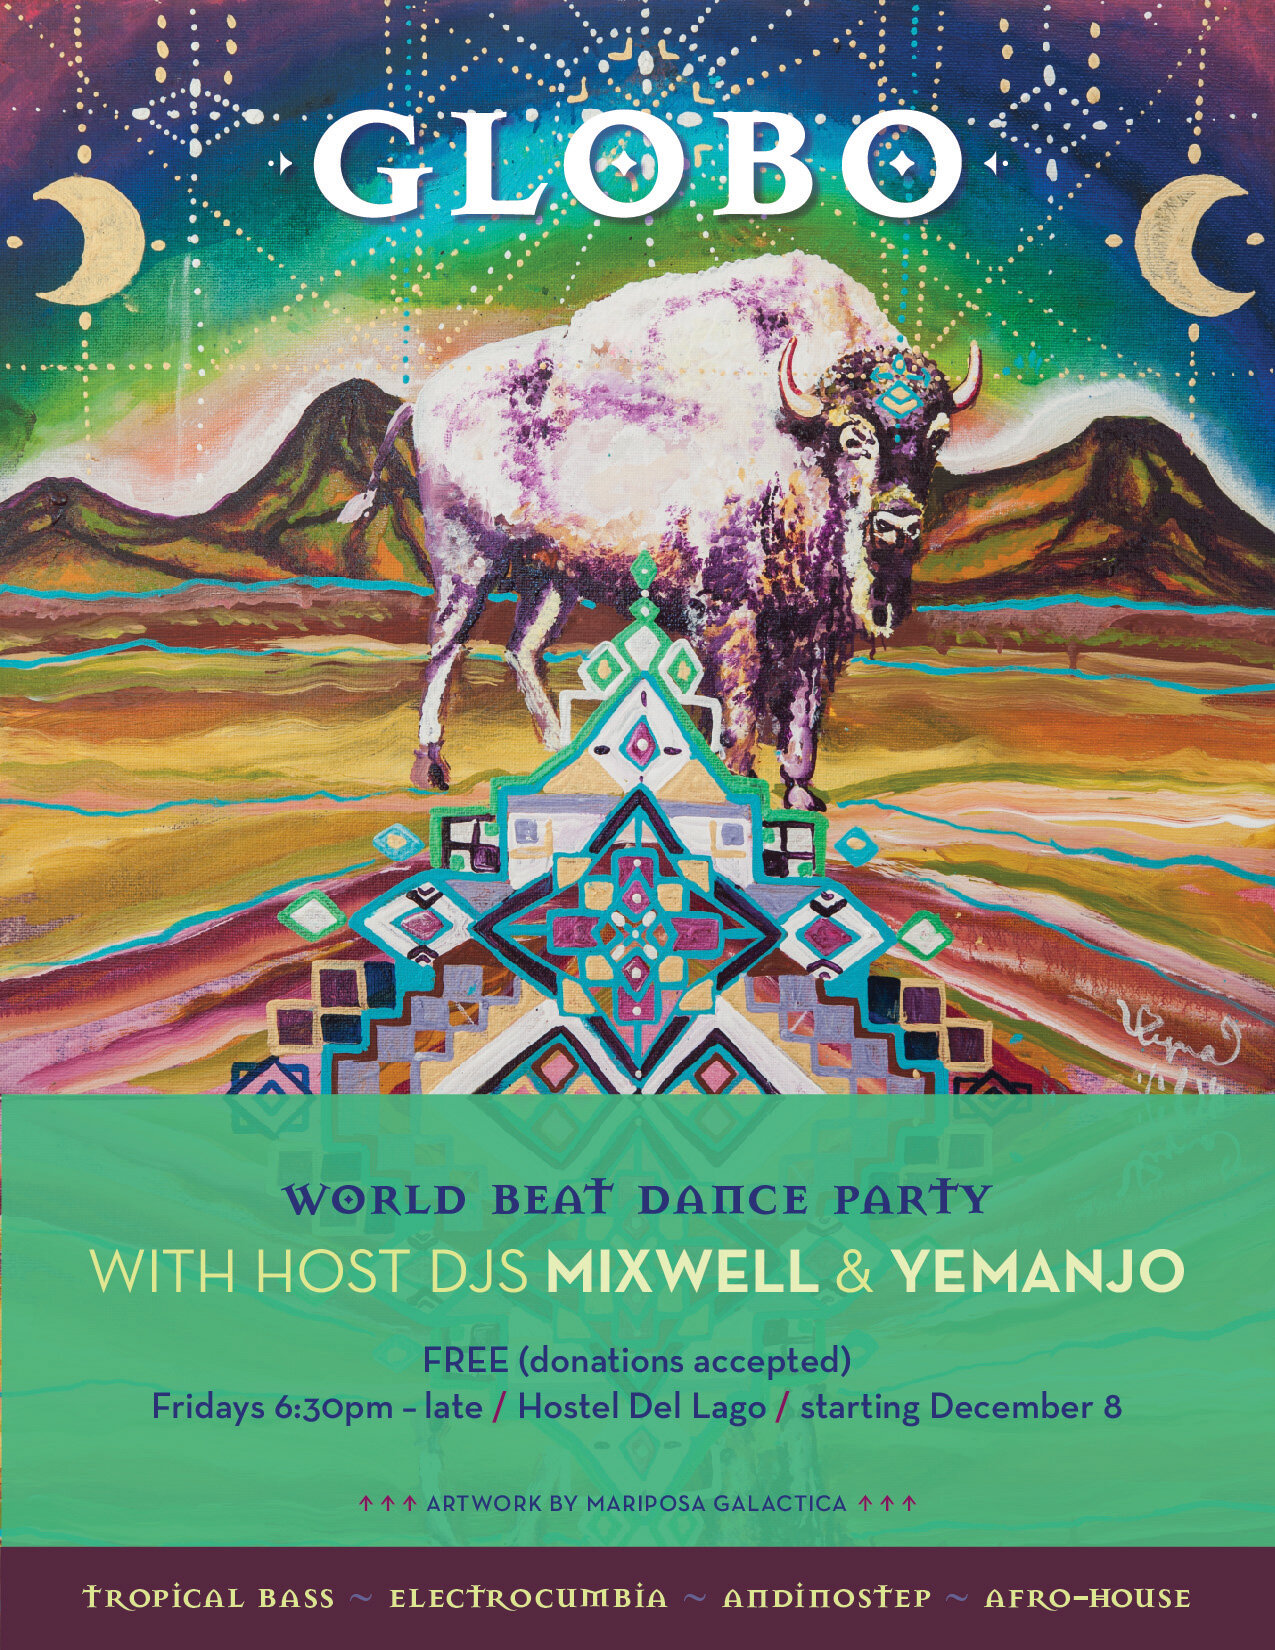  This was a flyer for a musical event hosted by Mixwell &amp; Yemanjo, in San Marcos La Laguna, Guatemala. 